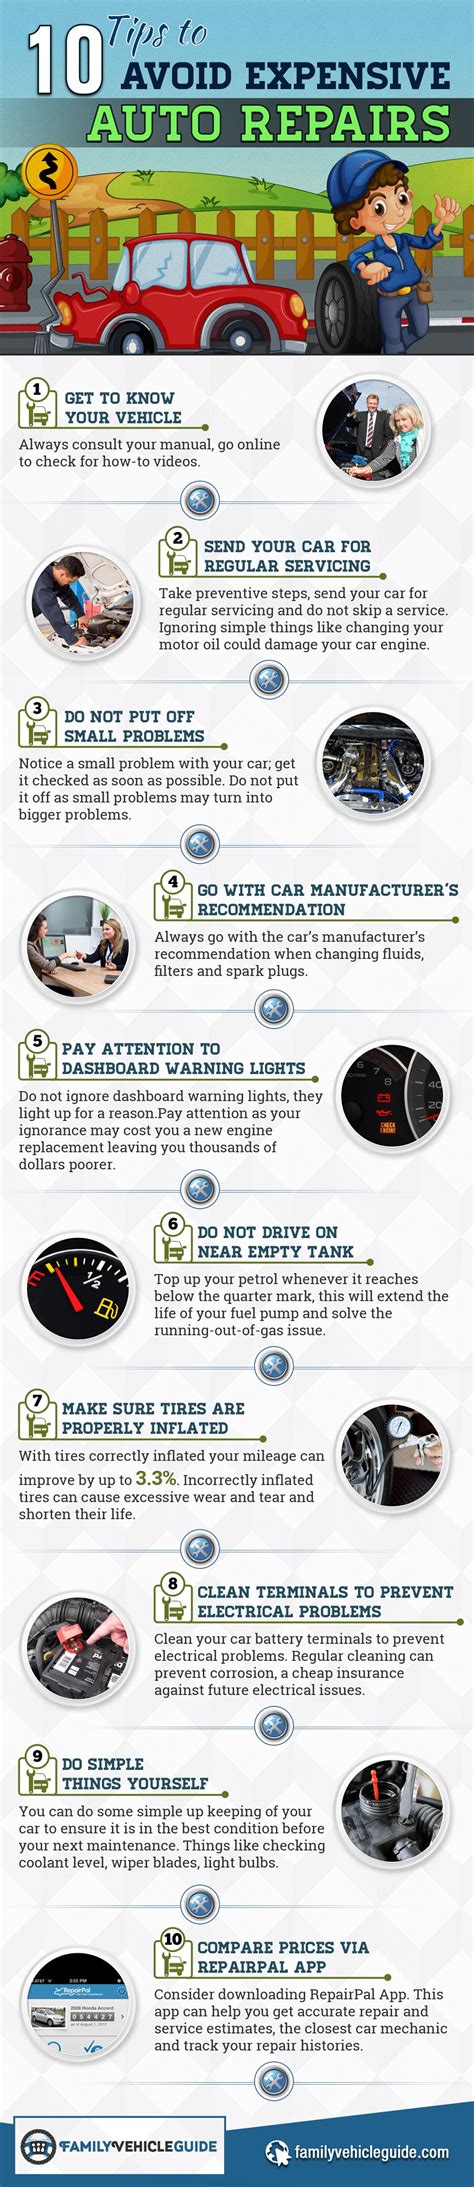 10 Tips To Avoid Expensive Auto Repairs Infographic Visualistan